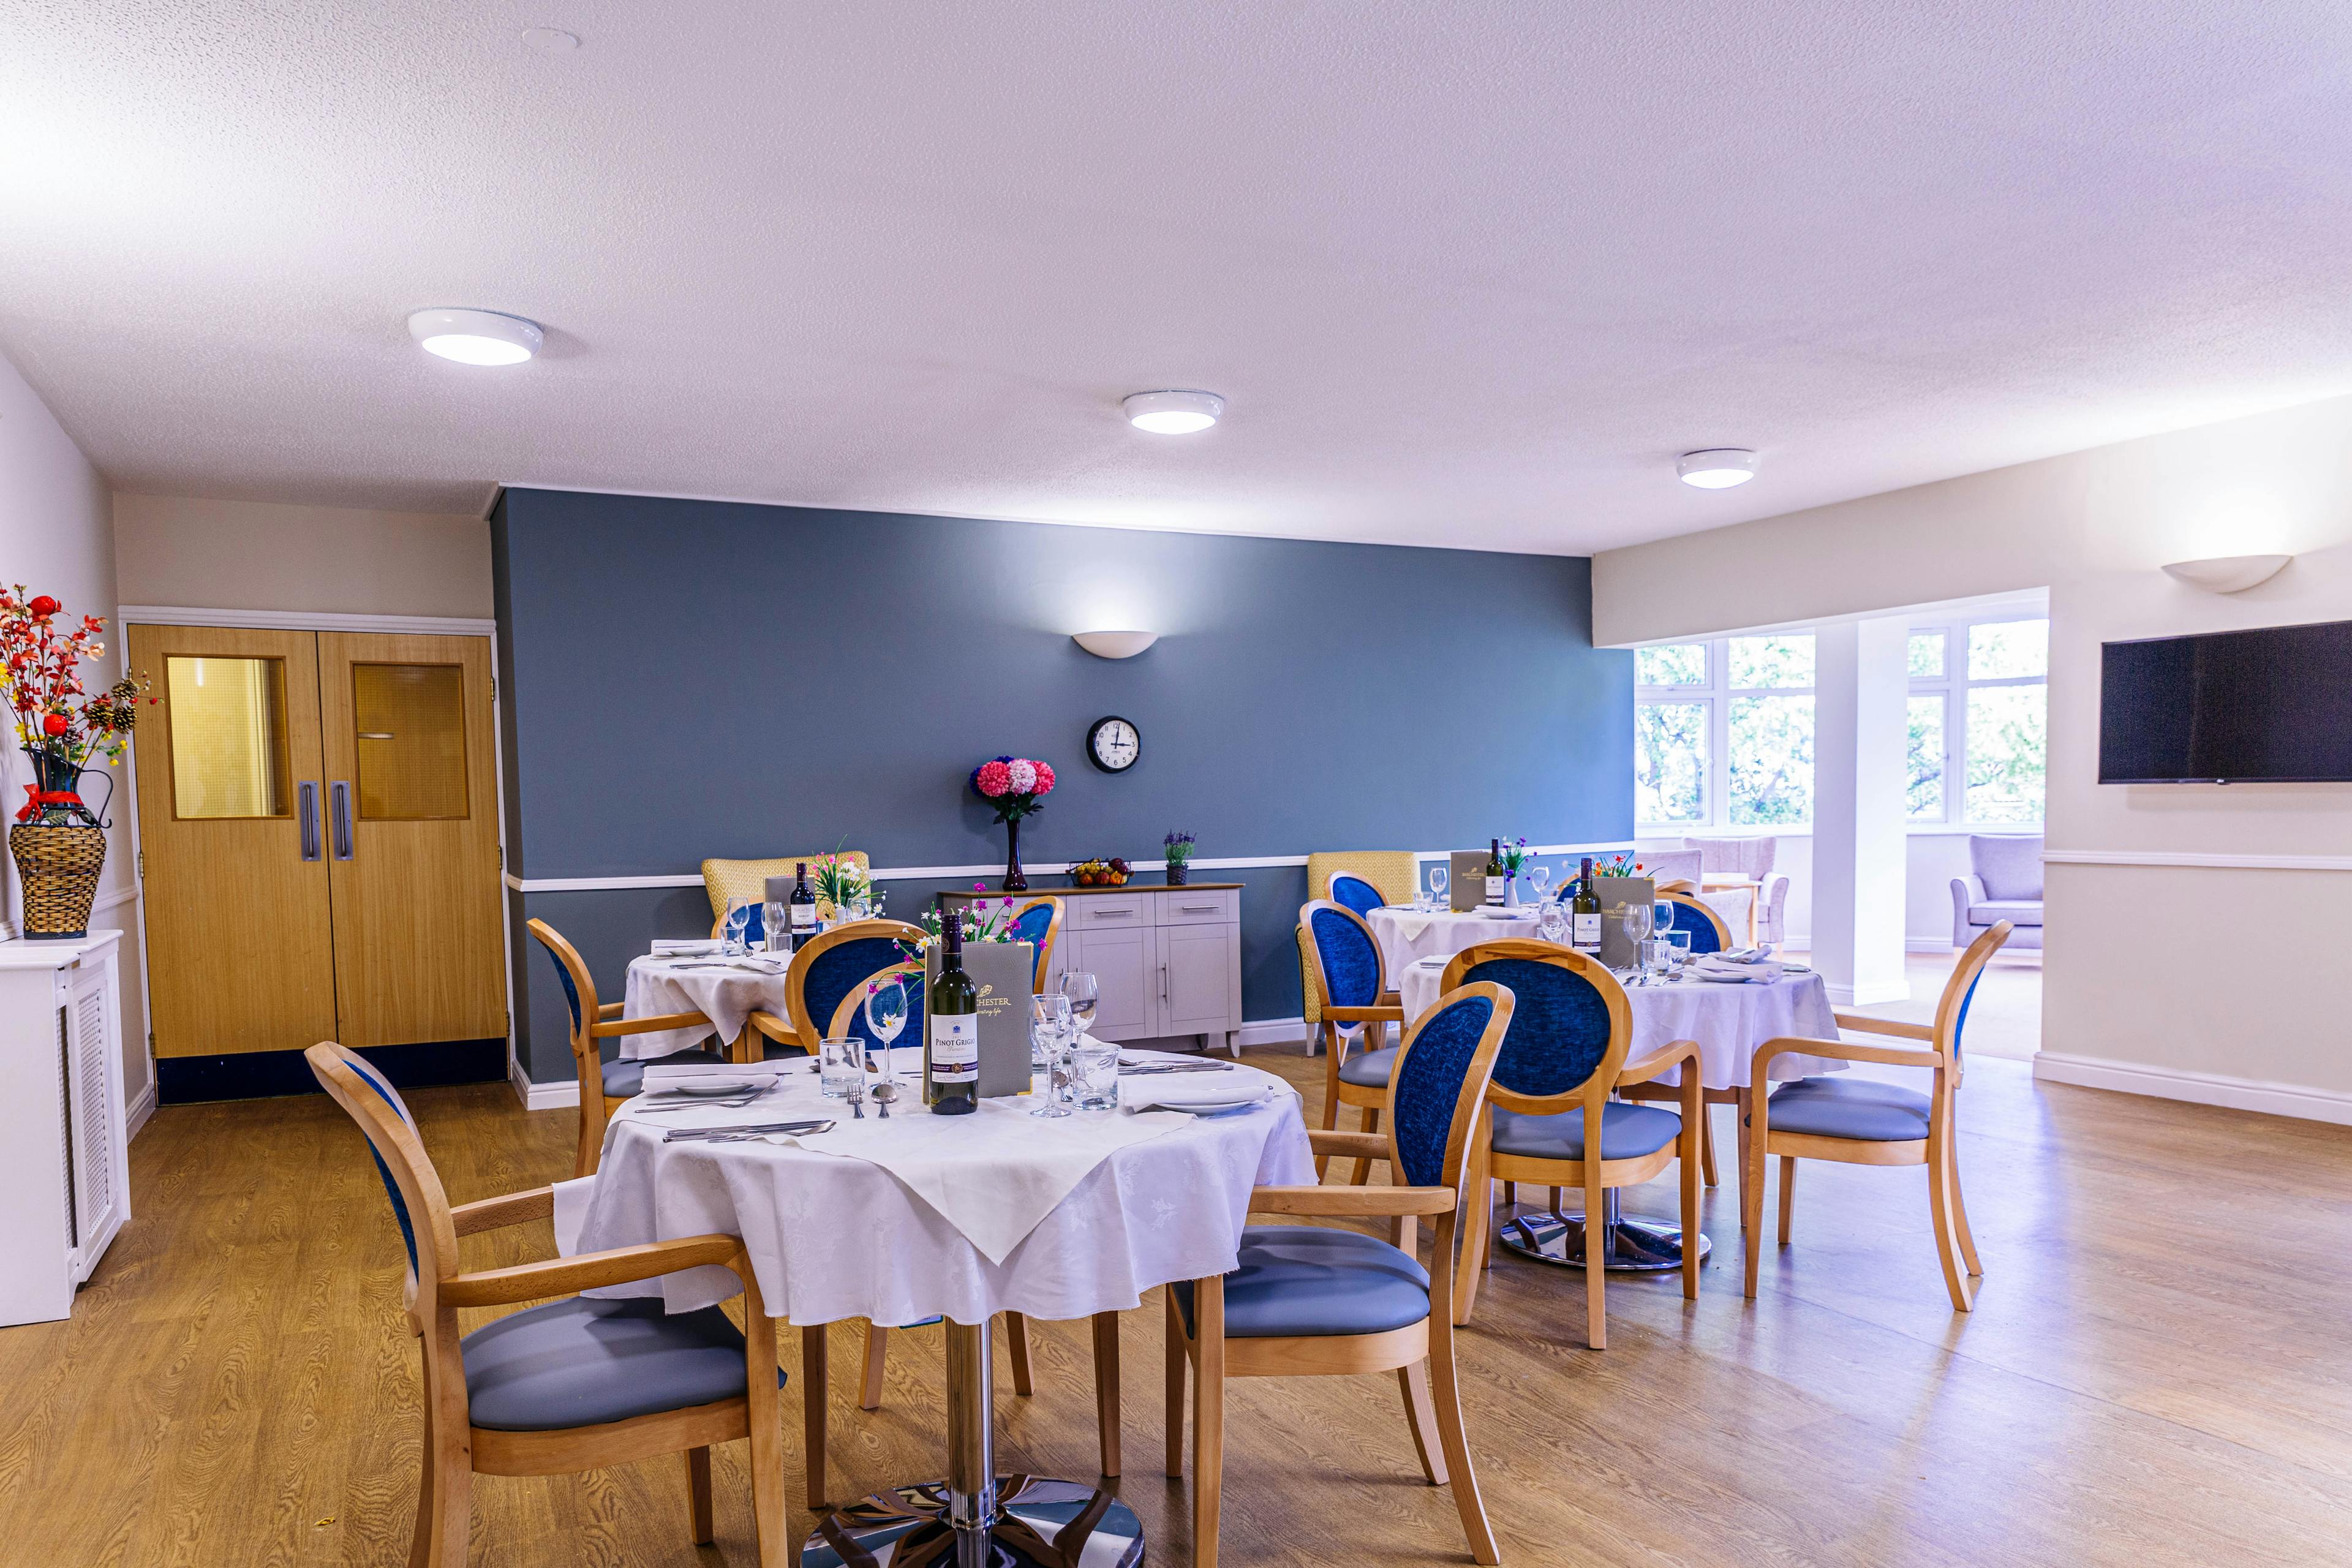 Dining Room of Kingswood Court Care Home in Bristol, South West England